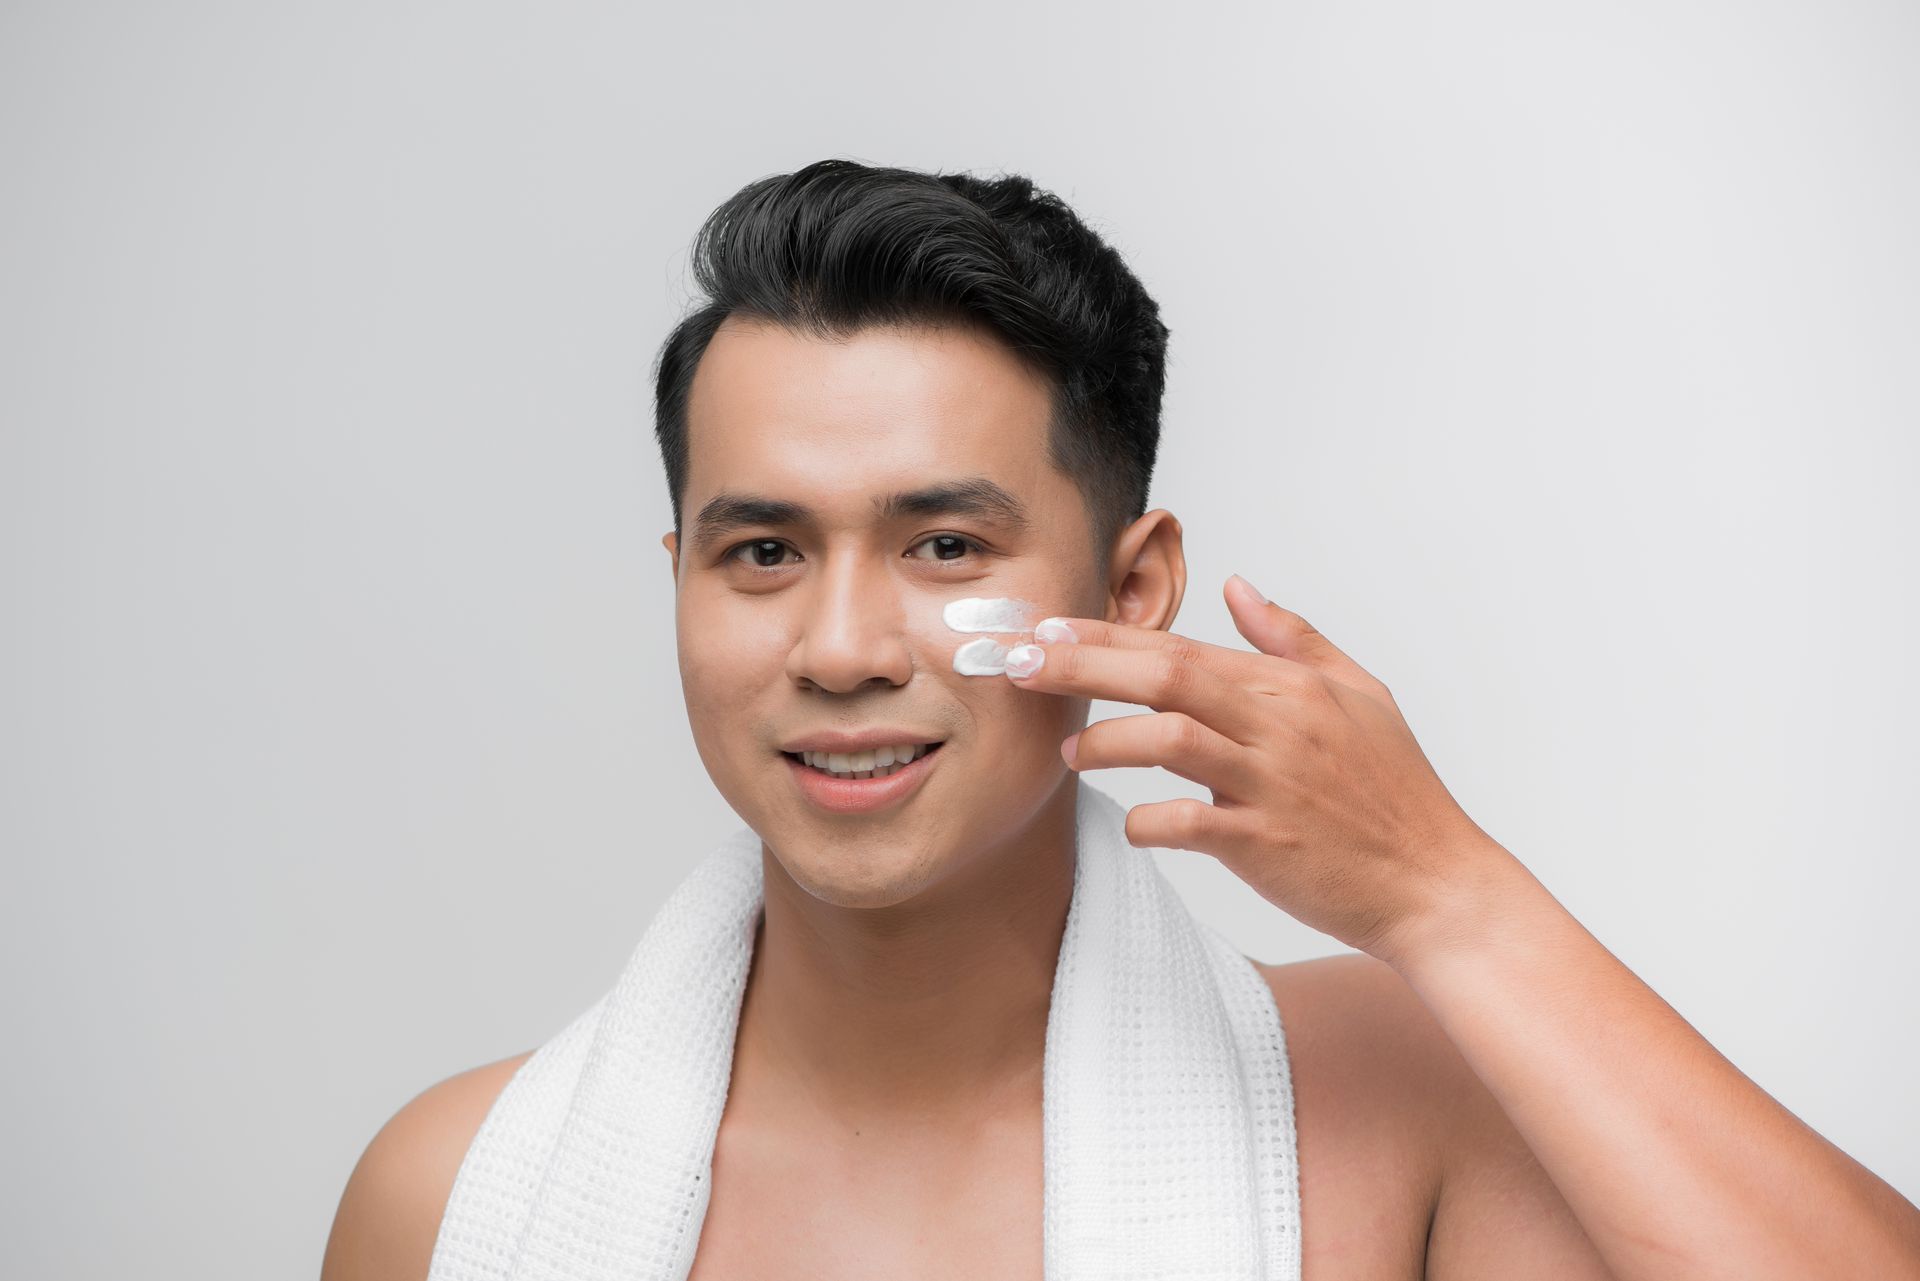 a man with a towel around his neck is applying cream to his face .